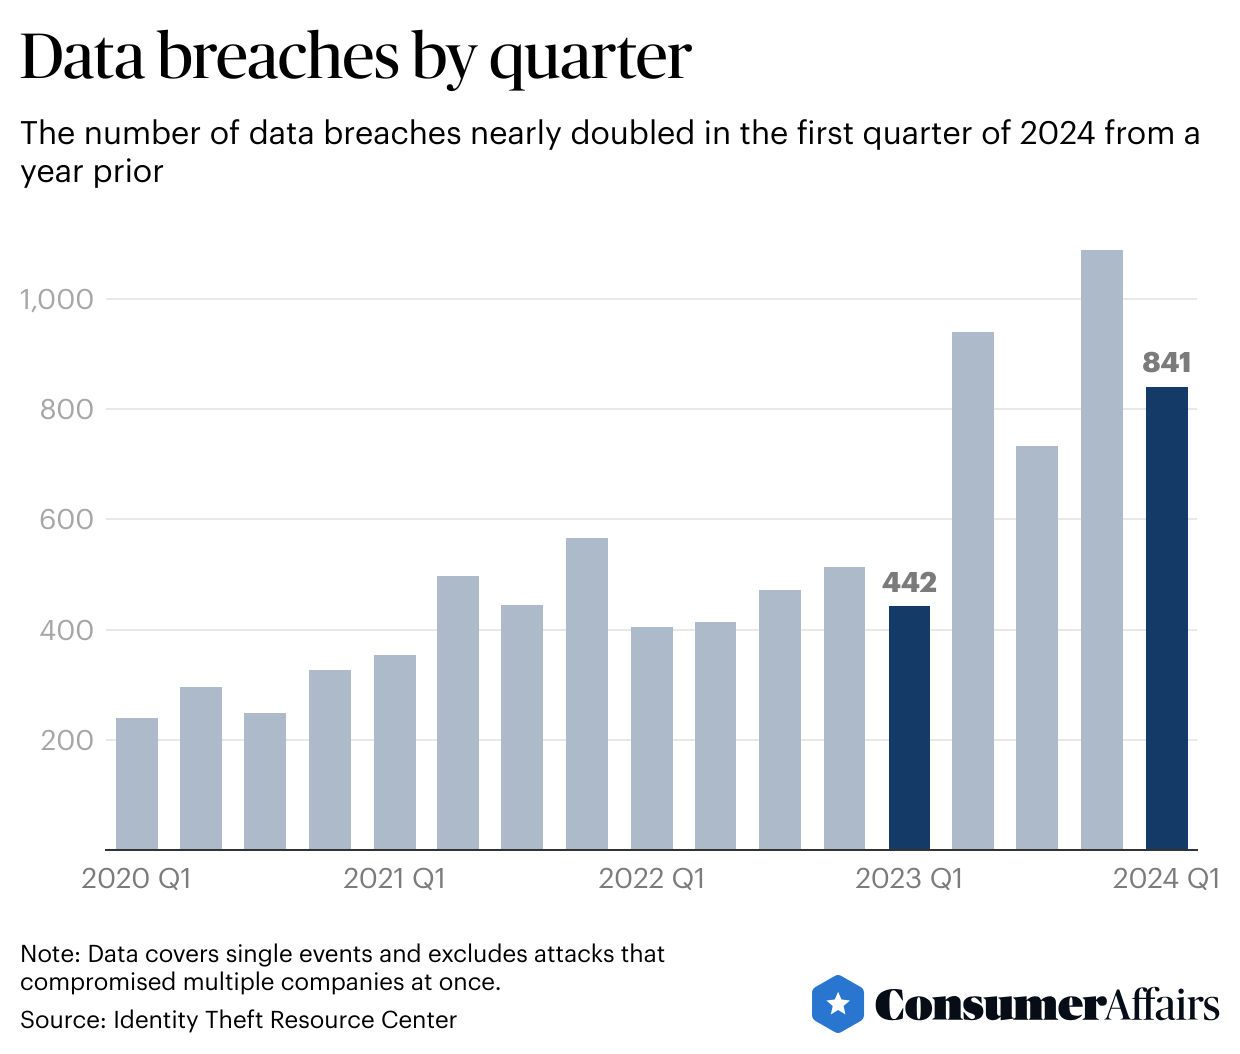 Graph showing “Data breaches by quarter” results.